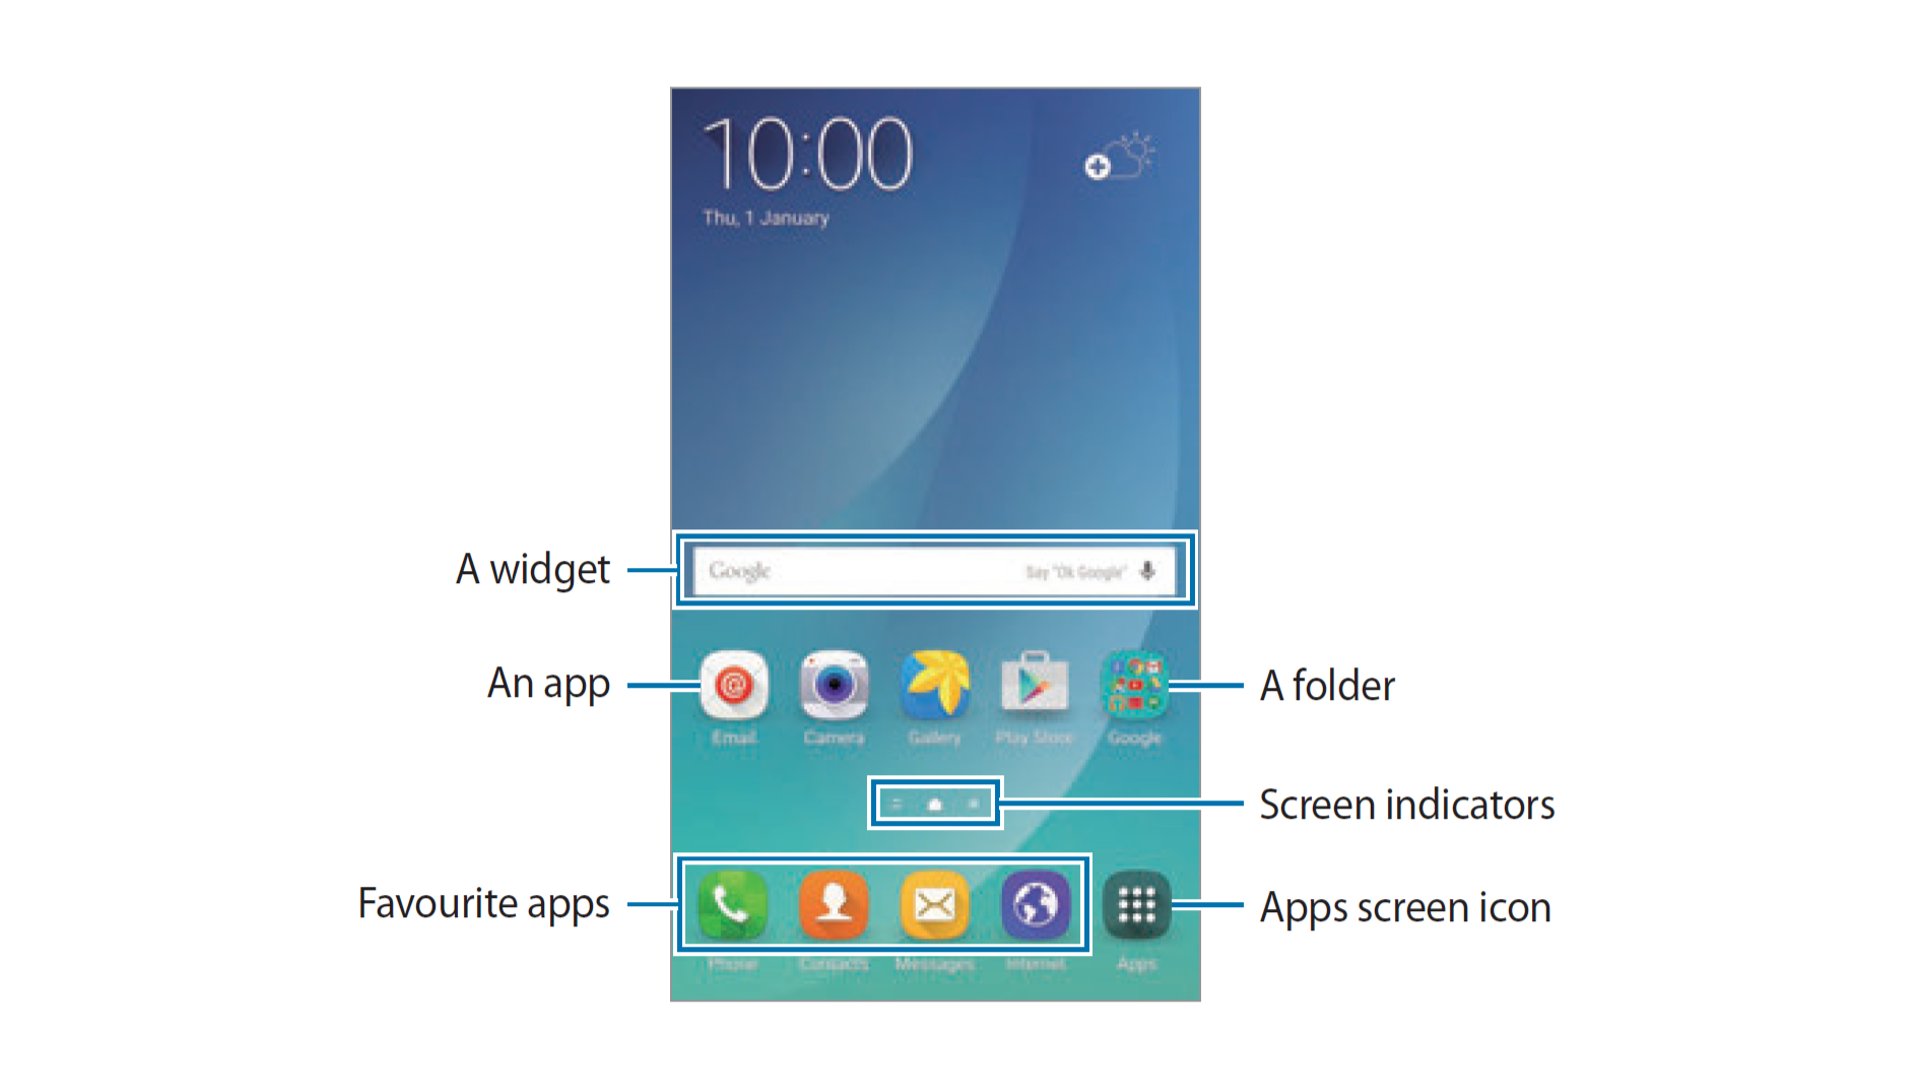 Samsung Galaxy Note 5 - Home Screen Overview